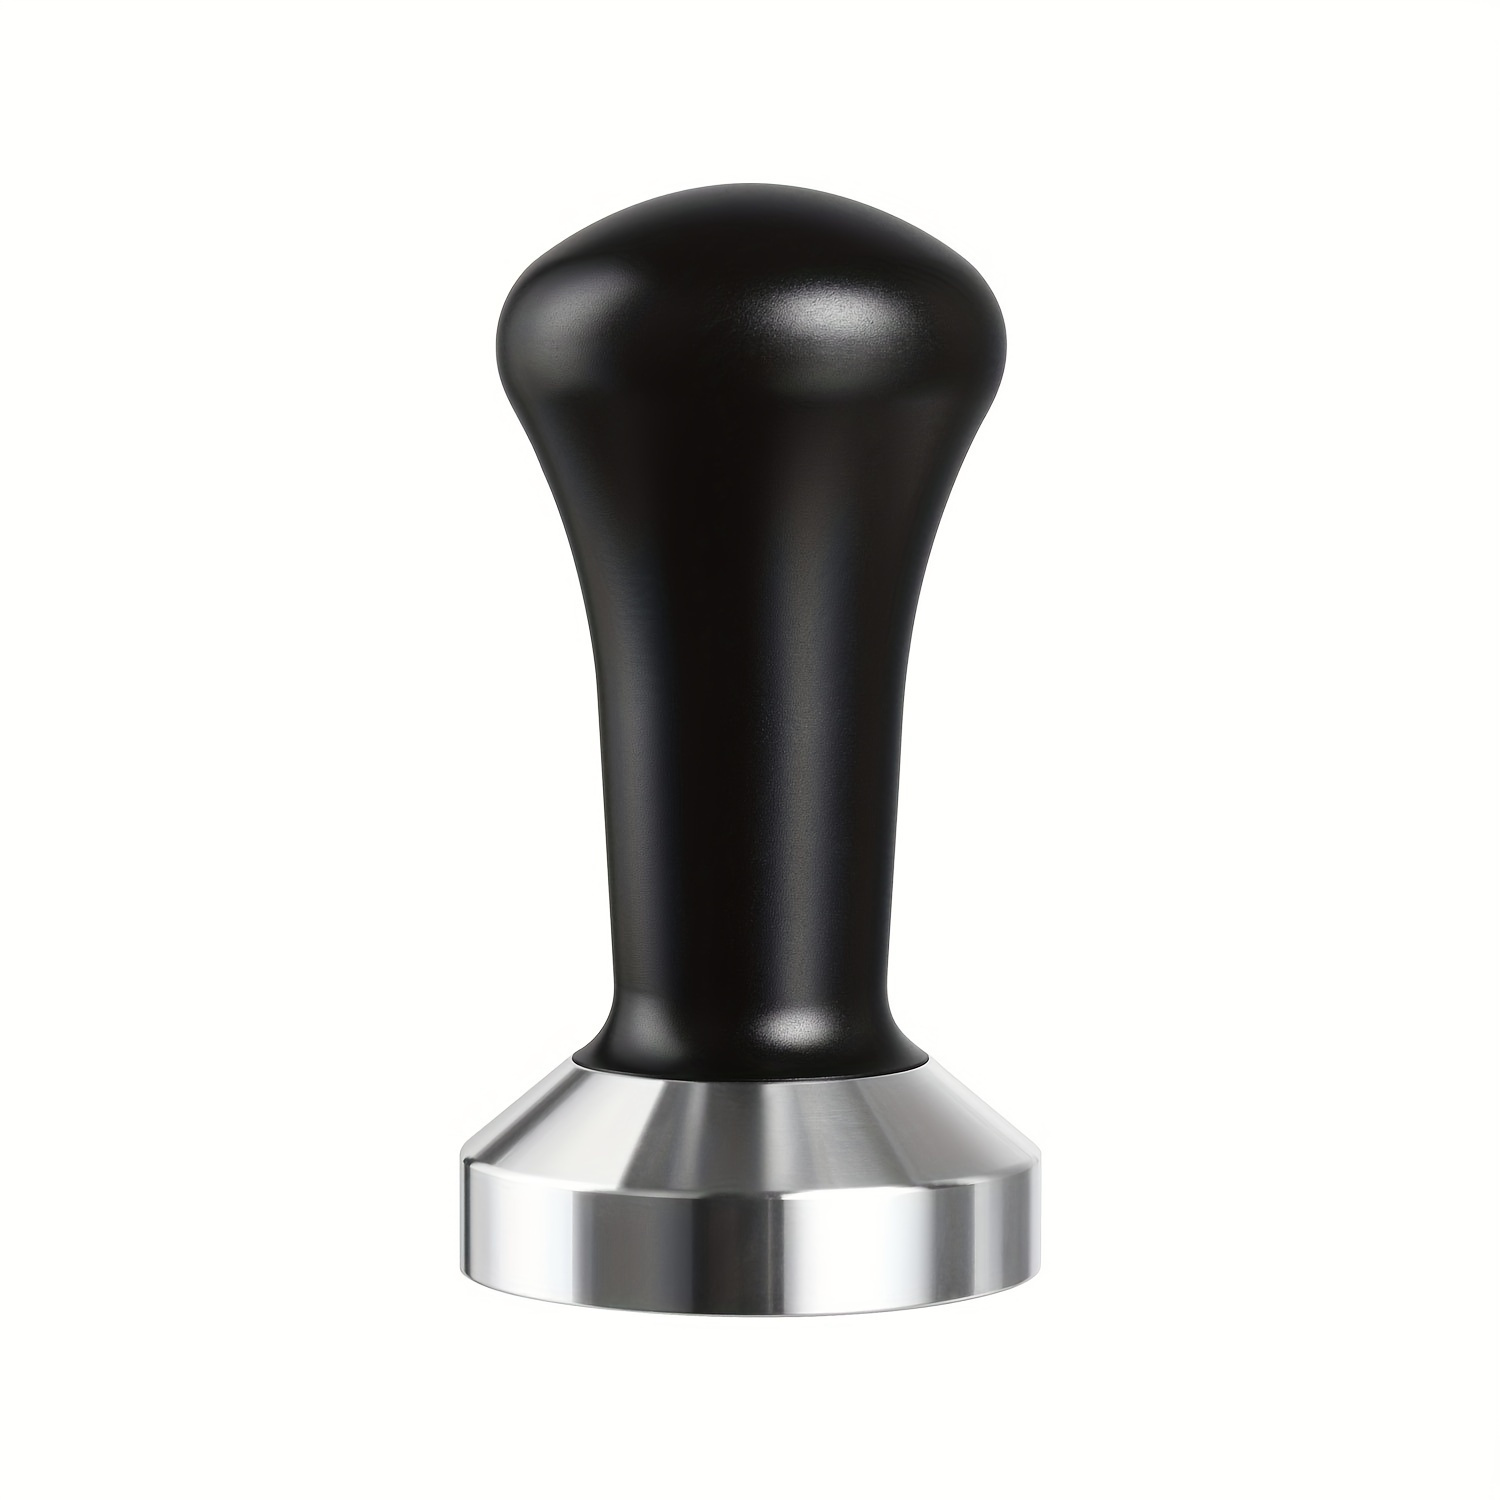 Coffee Tamper,coffee Press is Made of Stainless Steel and Roasted Coffee  Beans from Coffee Roaster on Black Background,tool Tamper Foto de archivo -  Imagen de expresado, acero: 159908762